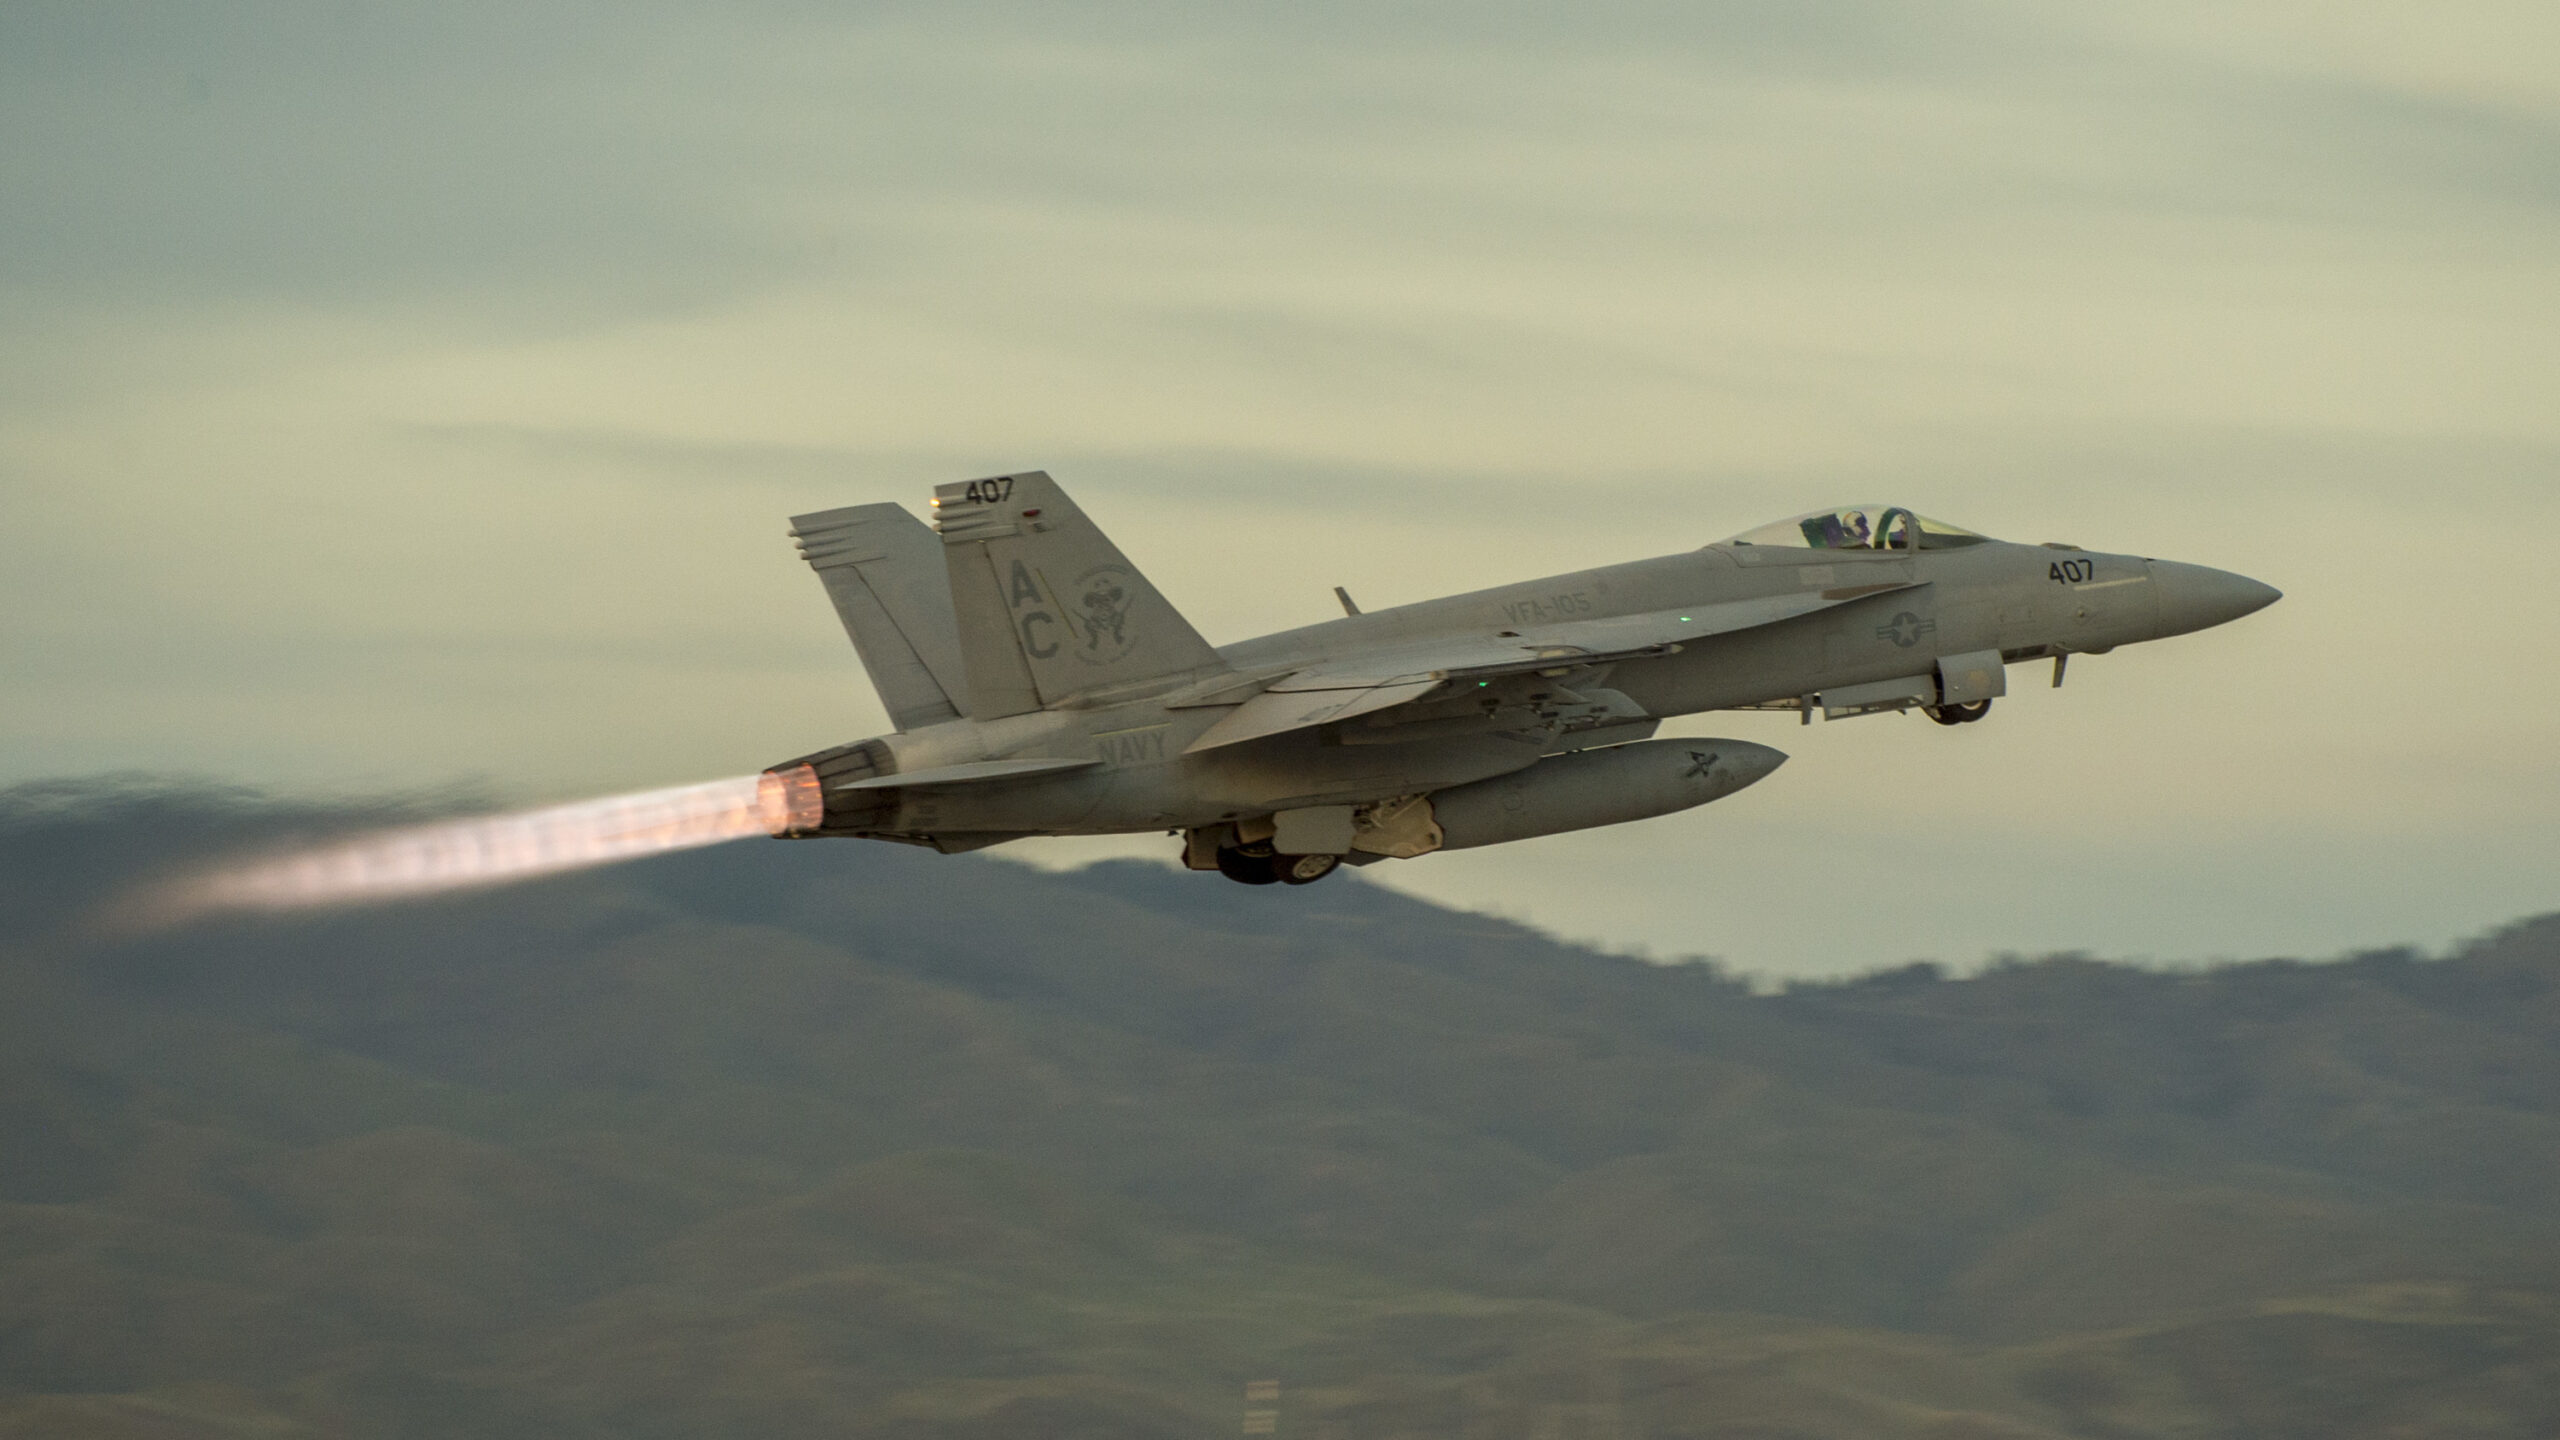 A F/A-18E from the VFA-105 “Gunslingers,” Naval Air Station Oceana, takes off from Gowen Field, Boise, Idaho, April 25, 2019, during a joint training exercise with the Idaho Air National Guard. Several F/A-18F Super Hornets of the VFA-32 “Fighting Swordsmen,” and F/A-18E Super Hornets of the VFA-83 “Rampagers” and VFA-105 “Gunslingers” from Naval Air Station Oceana flew alongside A-10 Thunderbolt IIs from the Idaho Air National Guard’s 190th Fighter Squadron for the joint training. (U.S. Air National Guard photo by Ryan White)